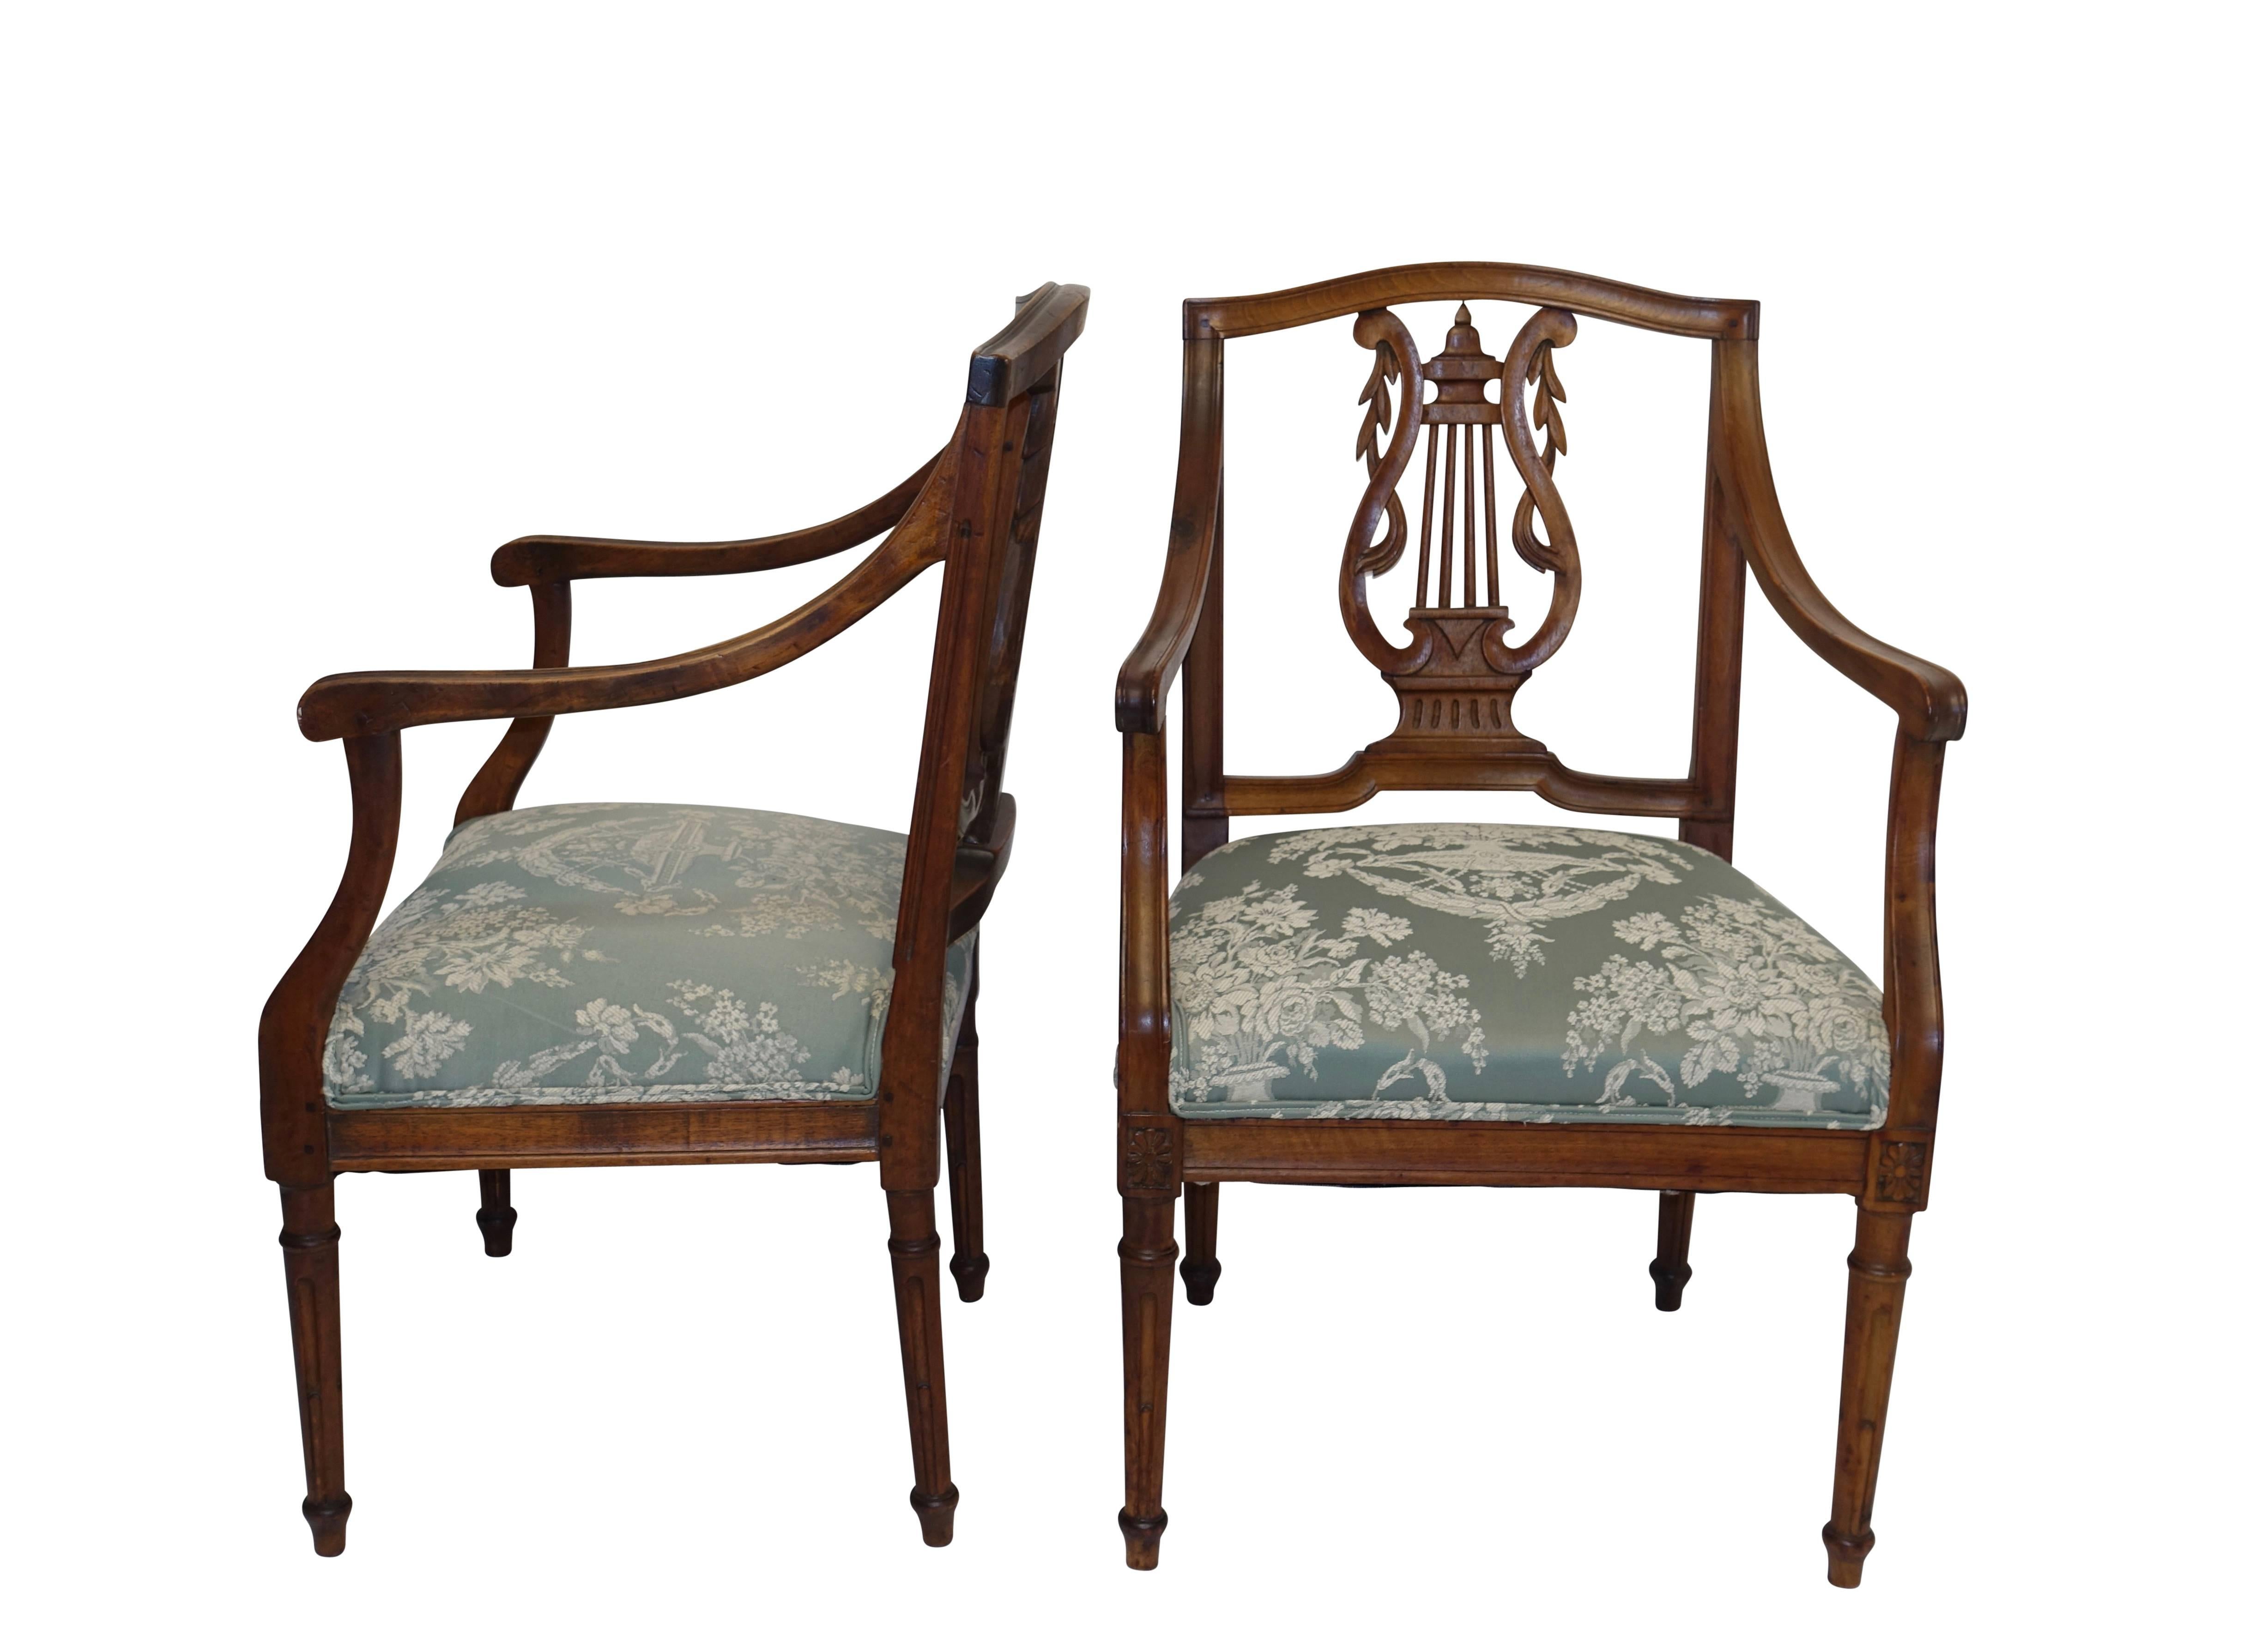 A pair of neoclassical carved walnut fauteuils with carved lyre shape backsplat, sitting on carved and fluted legs. Recently re-upholstered, Northern Italy, 18th century.